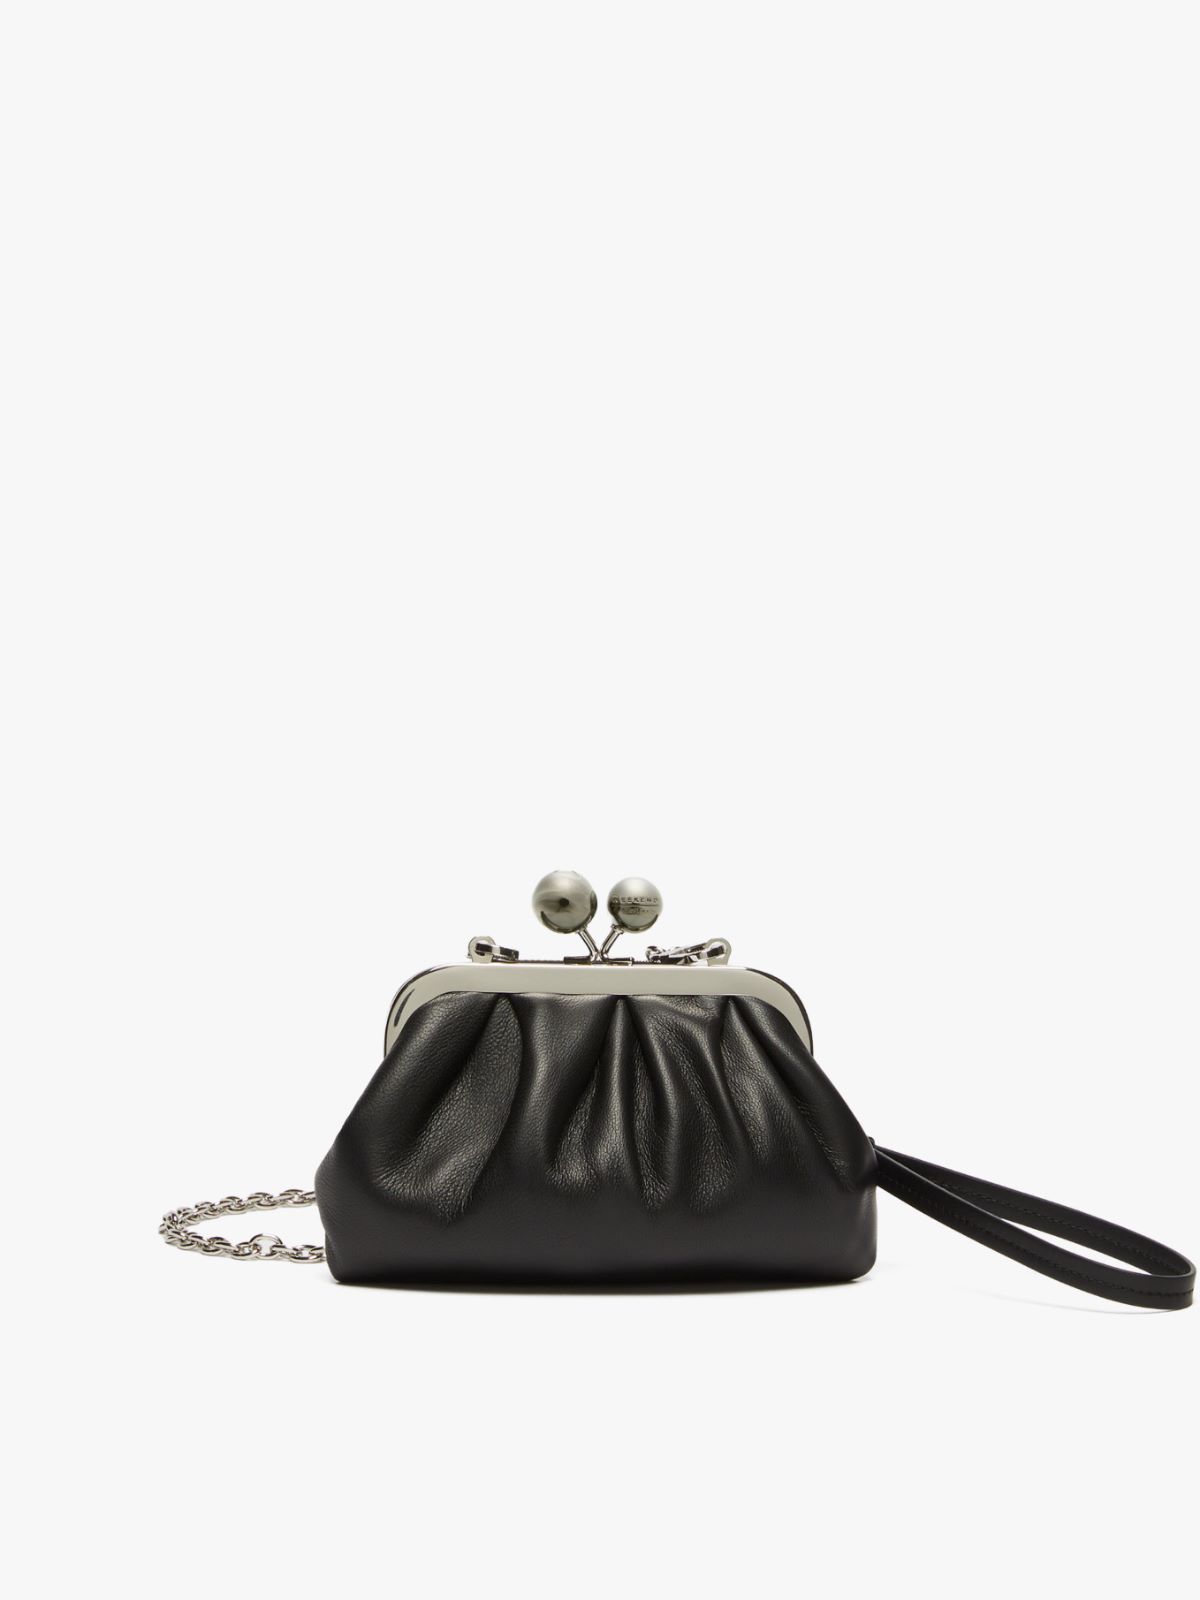 Pasticcino Bag wallet in nappa leather, black | Weekend Max Mara